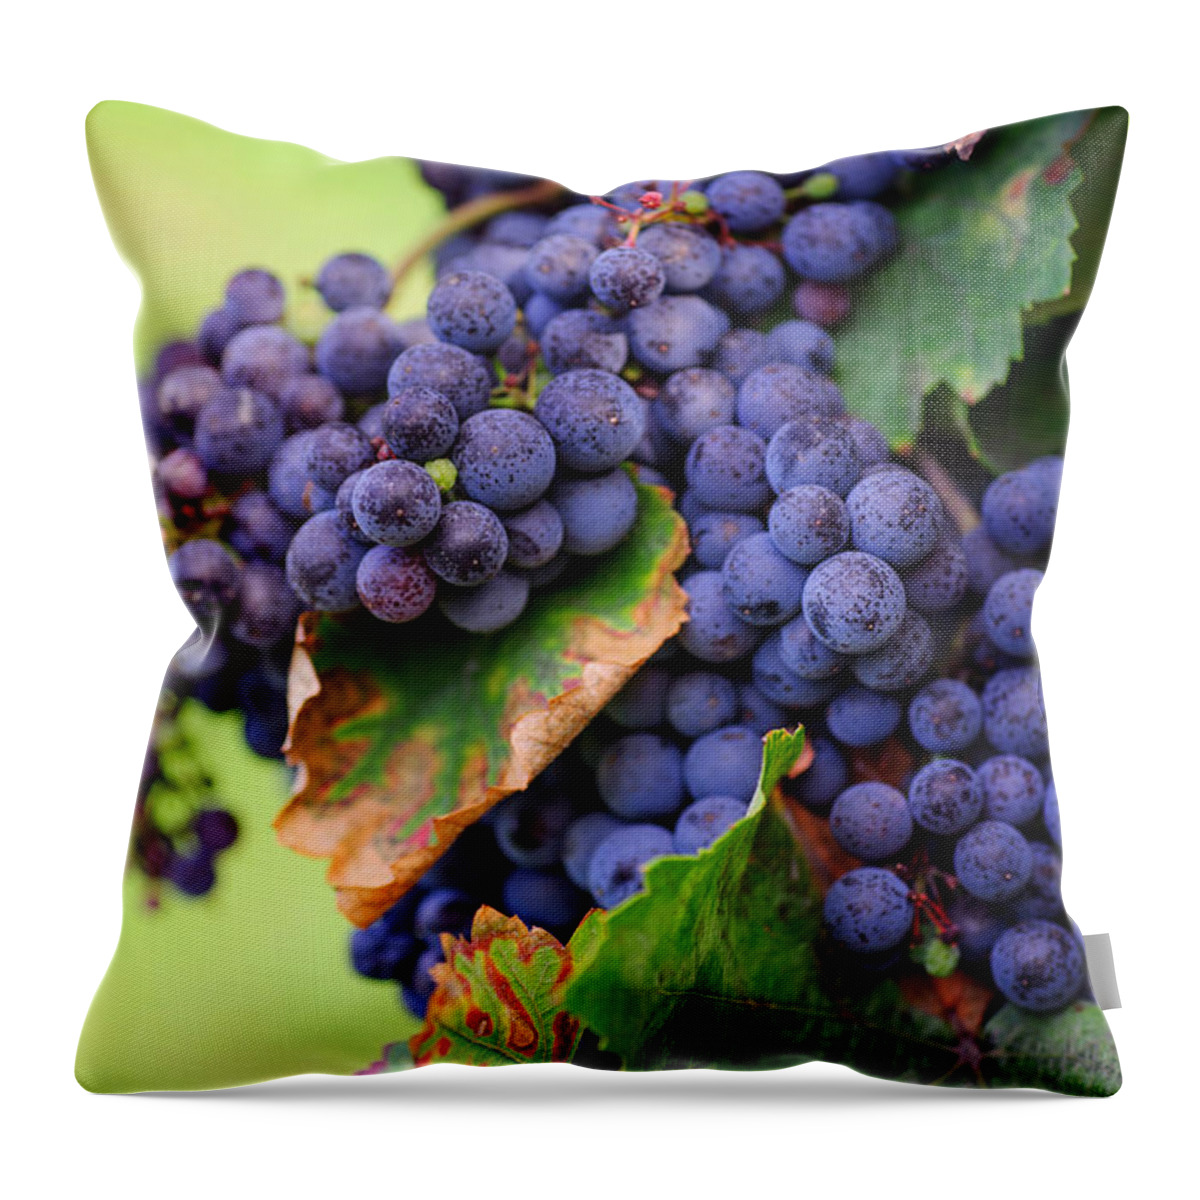 Grapes Throw Pillow featuring the photograph Harvesting by Jenny Rainbow